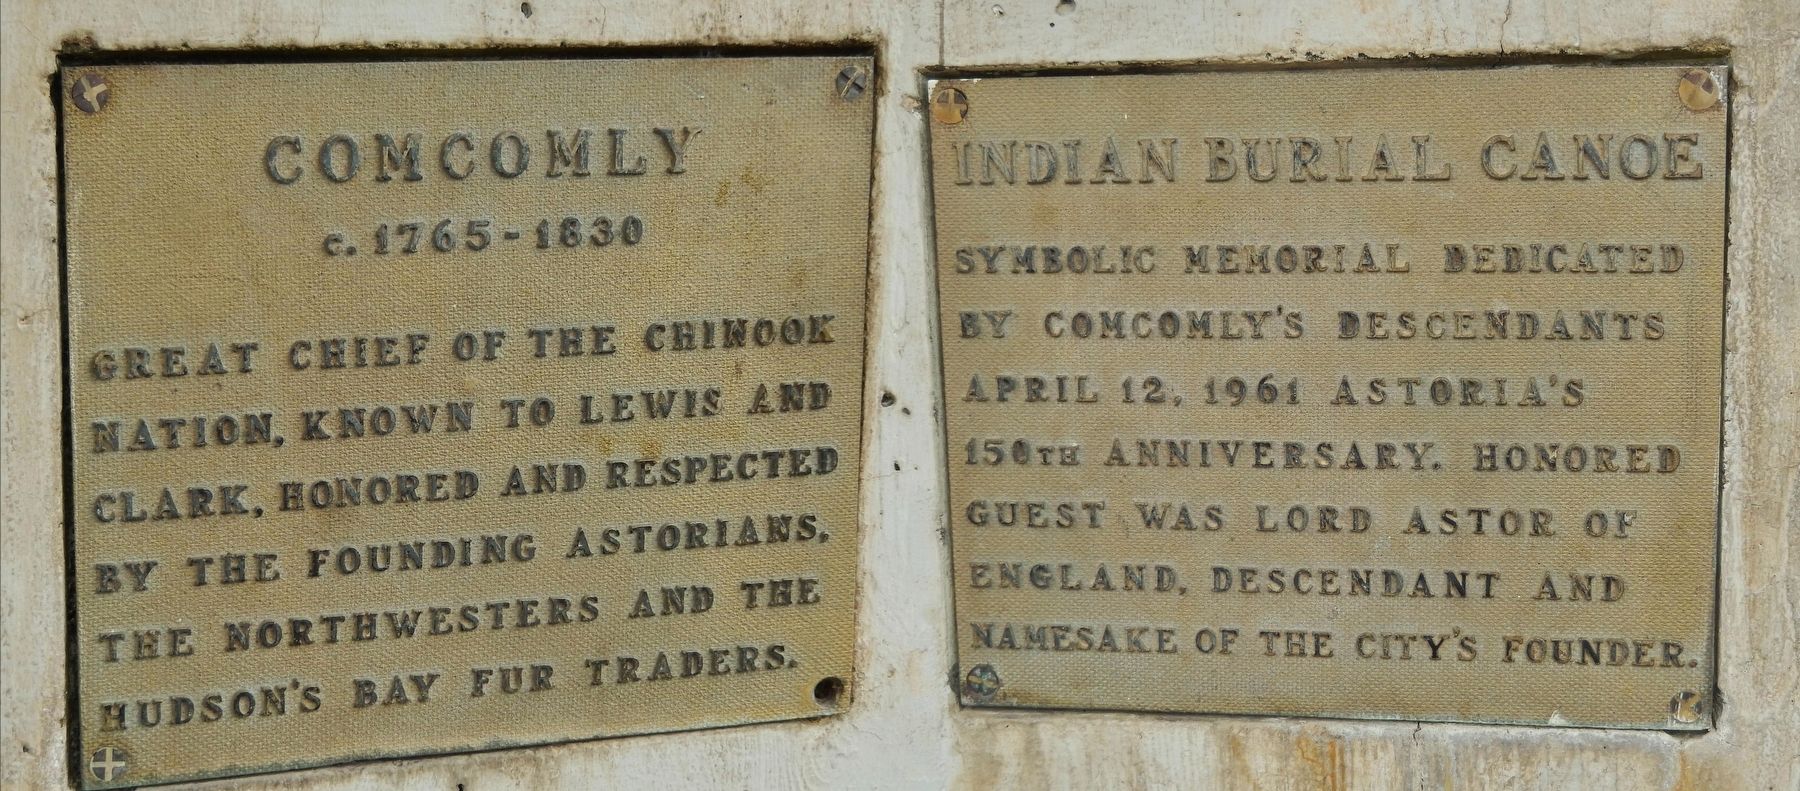 Comcomly / Indian Burial Canoe Marker image. Click for full size.